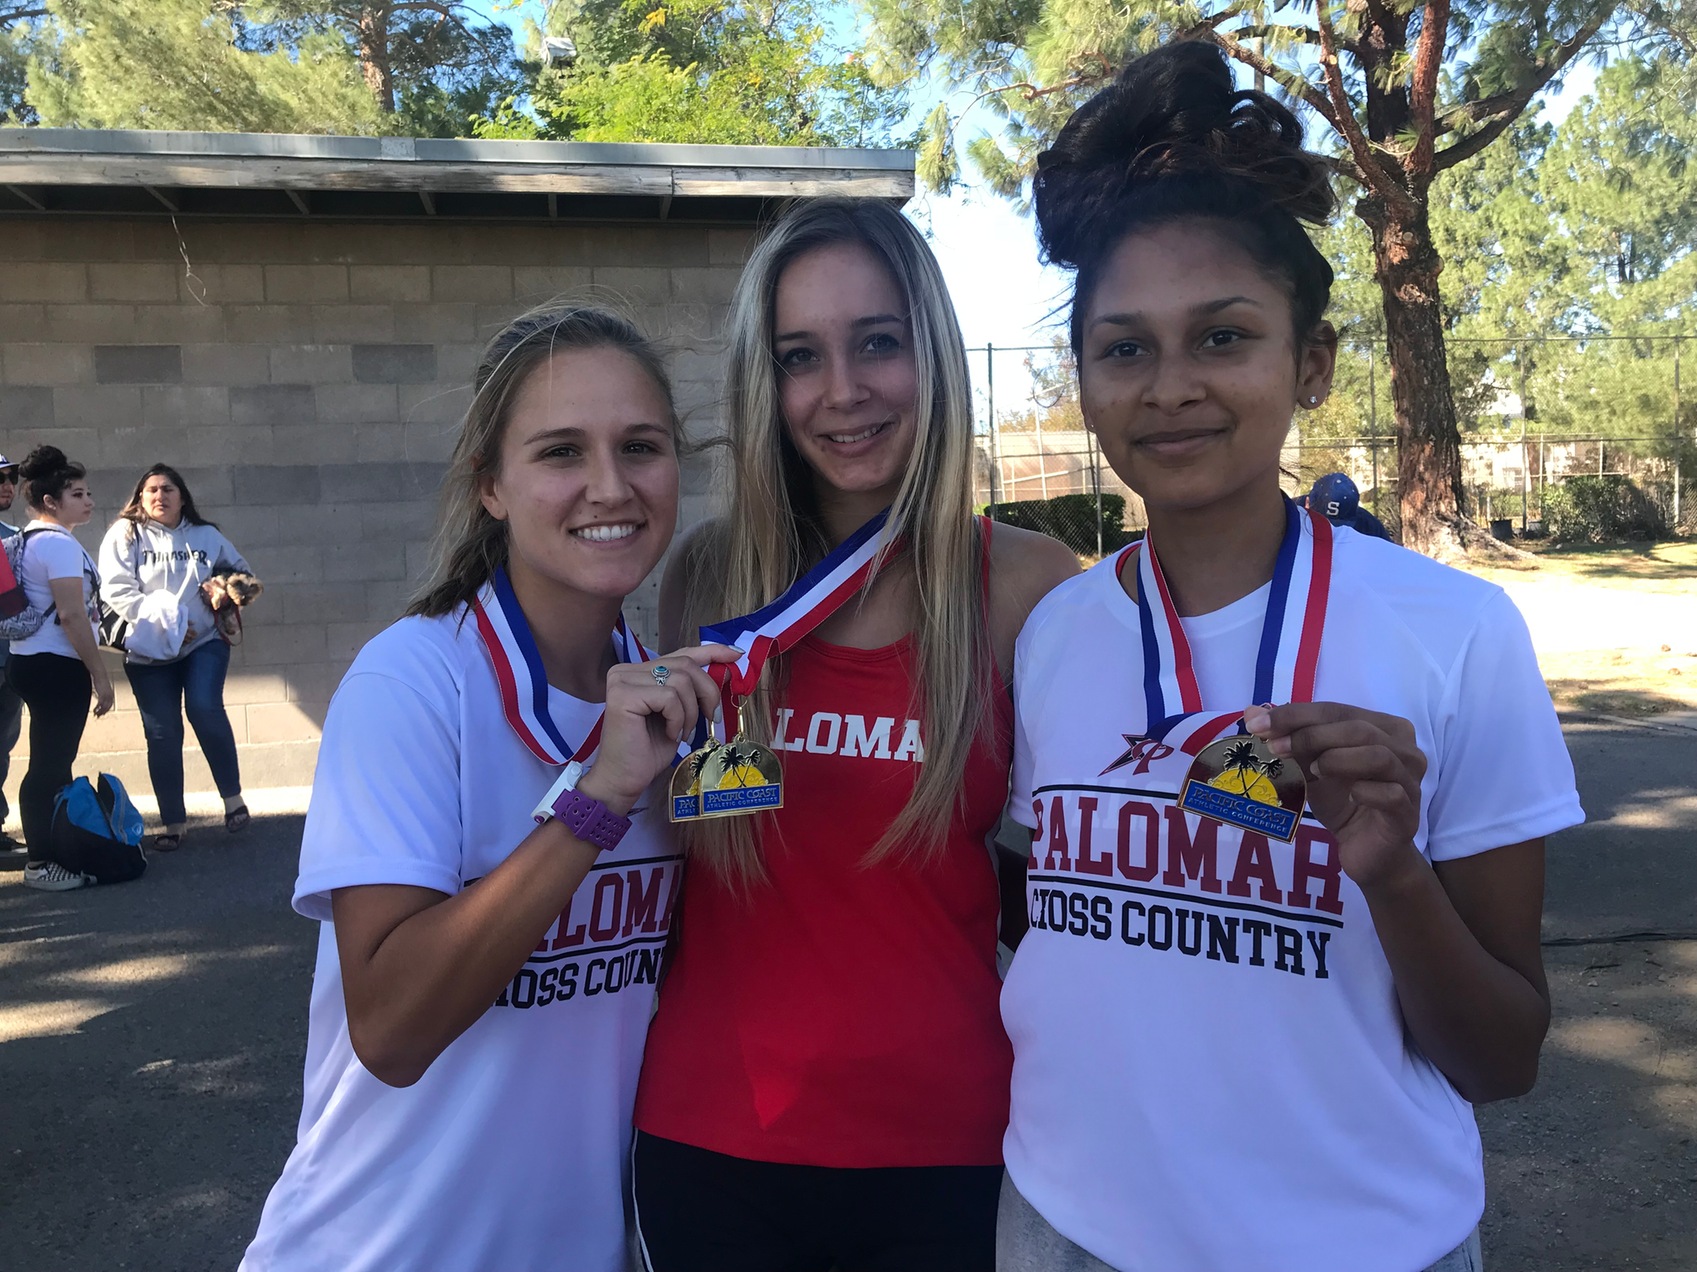 Maia Chaffin (center) was 8th, Hanna Lopez (left) 12th & Cassandra Ramos (right) 13th.